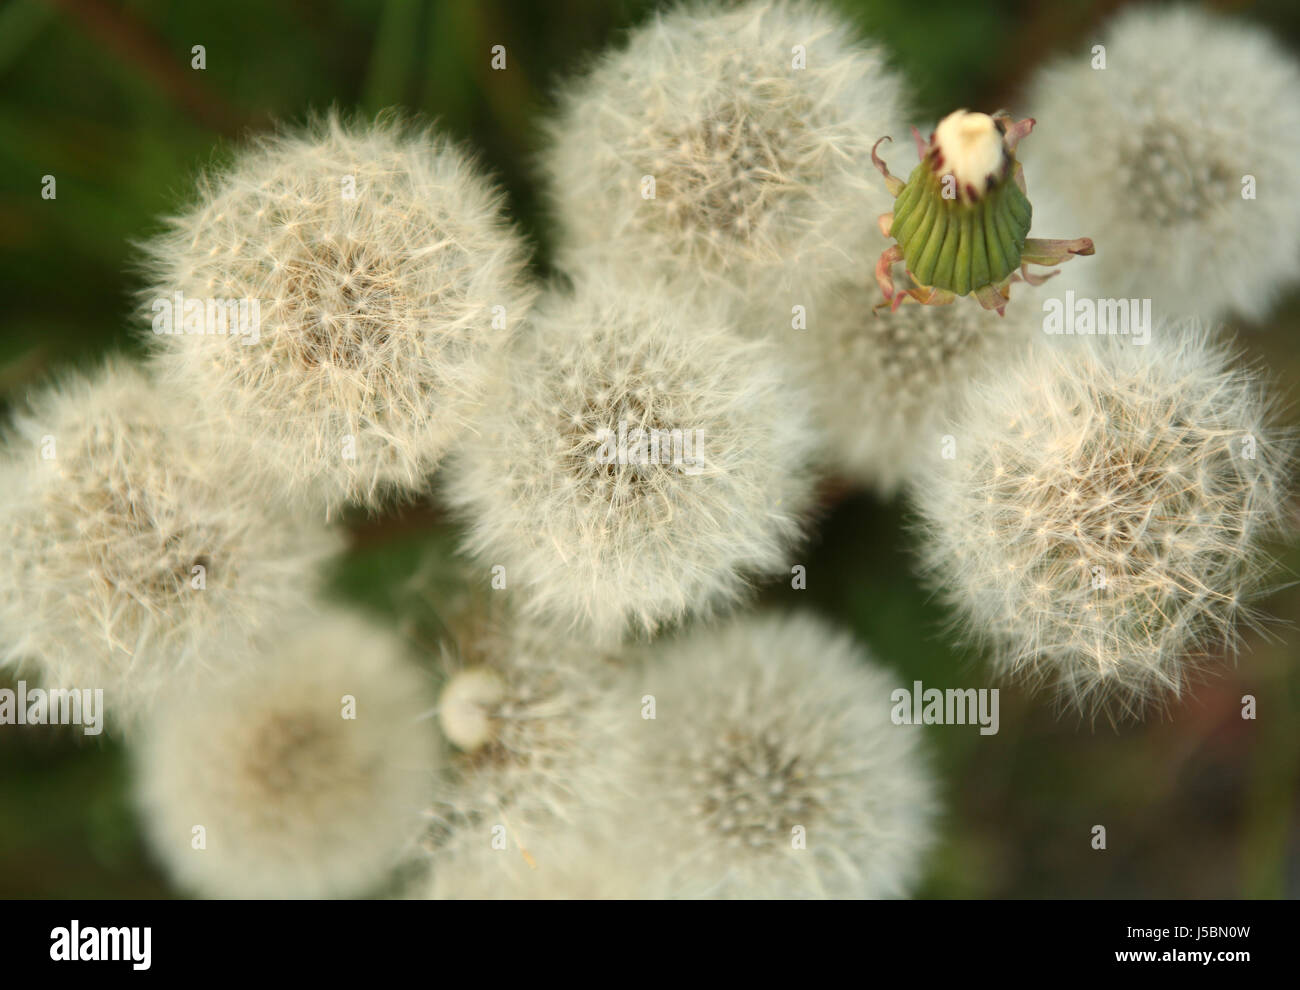 flower plant flowers flora flower meadow blowball sperm dandelion weed withers Stock Photo